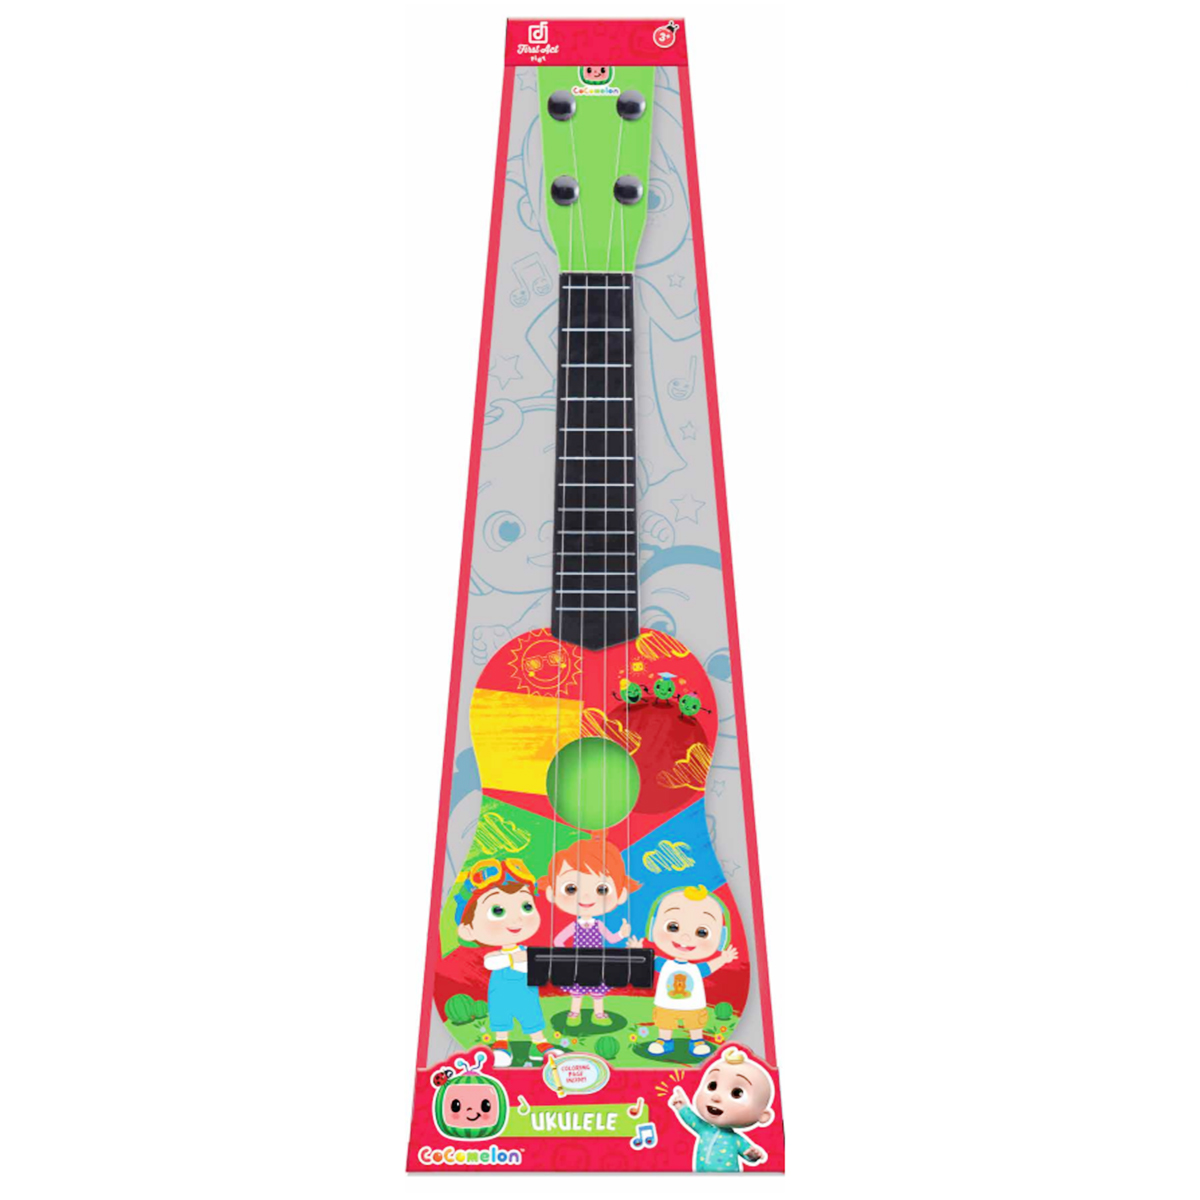 Ukulele Cocomelon, First Act, 40 cm, S2 CoComelon